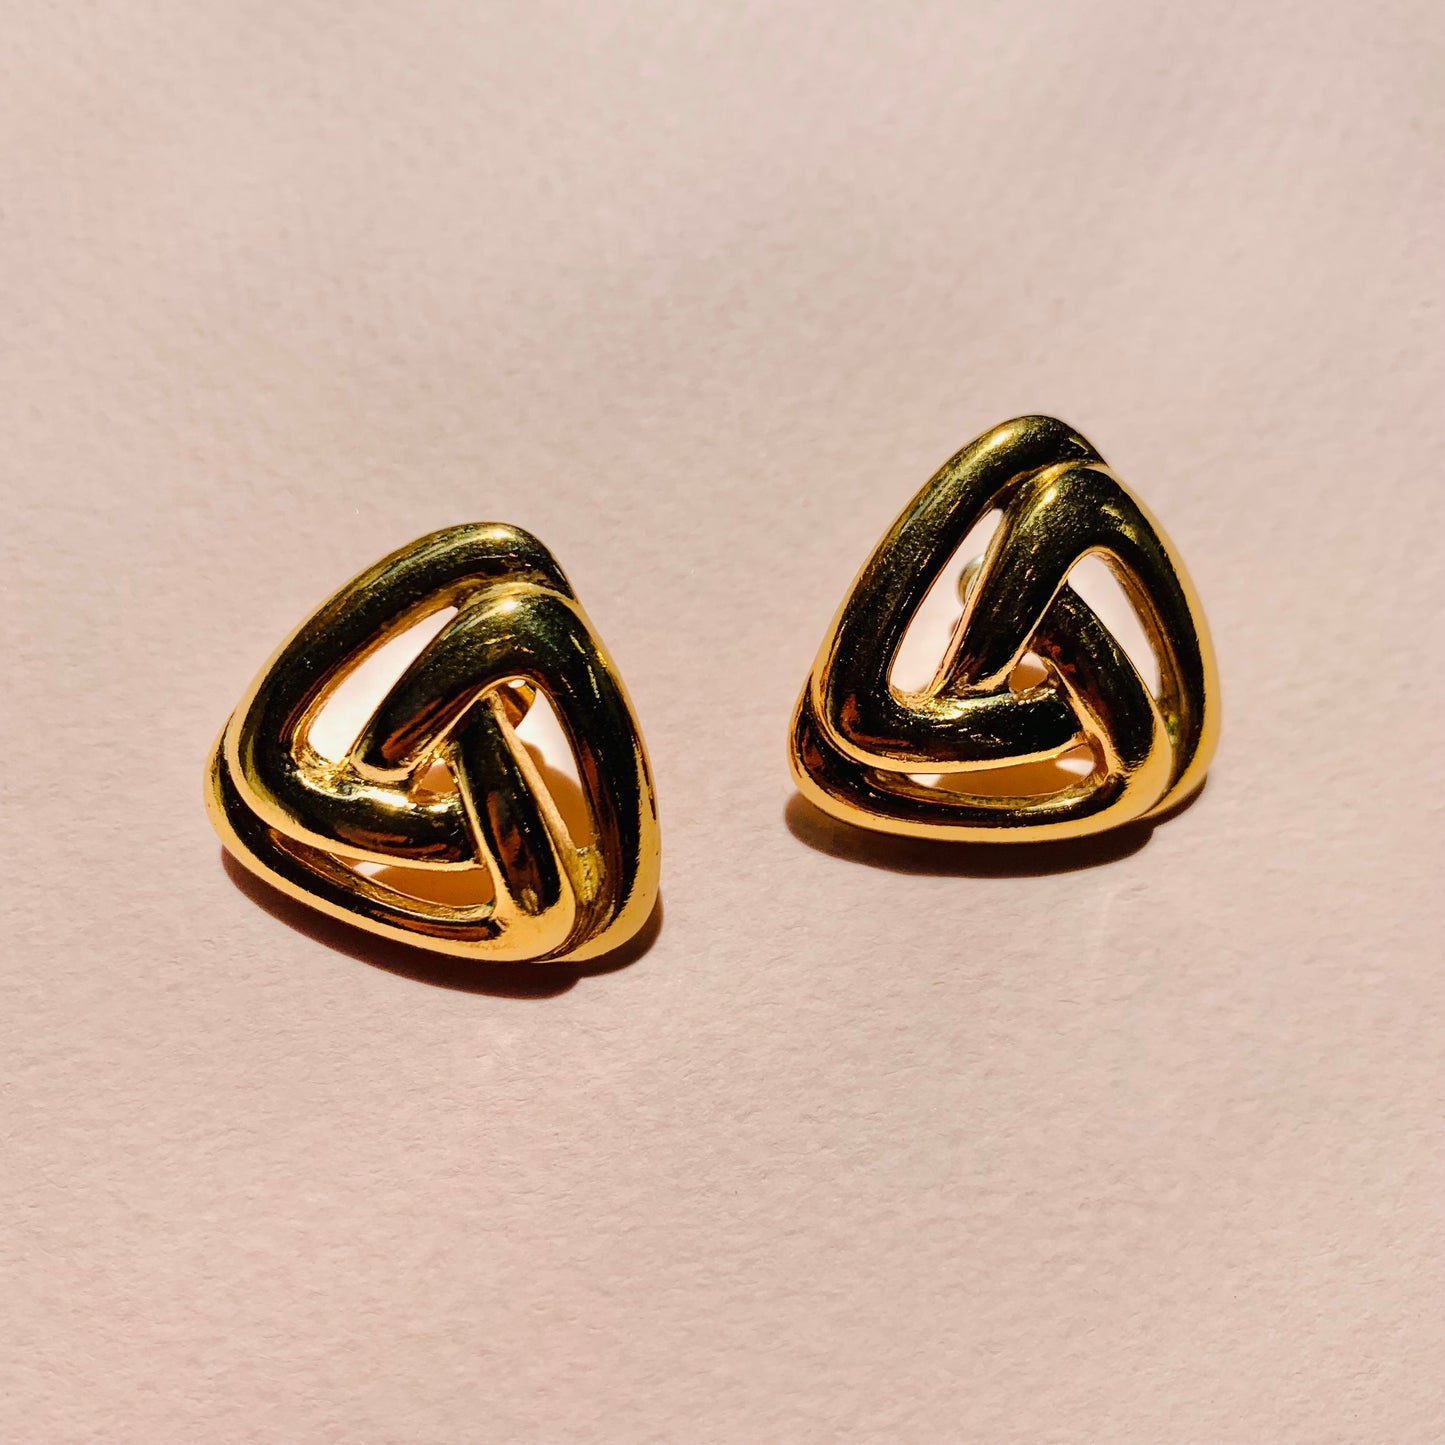 Rare 1970s triple gold plated earrings by Monet